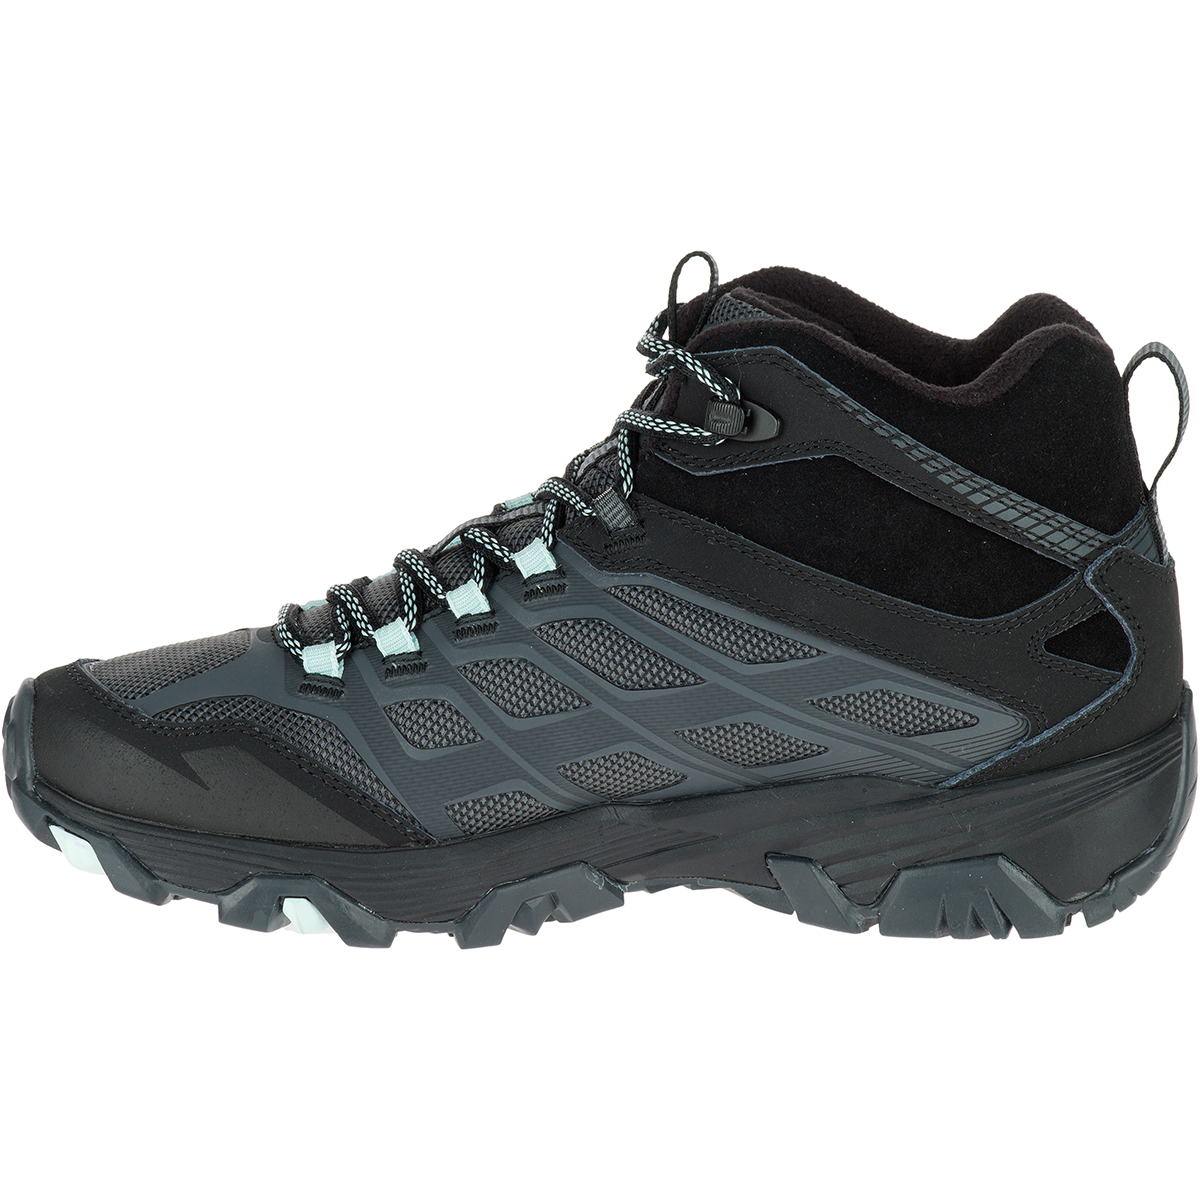 MERRELL Women's Moab FST Ice+ Thermo 